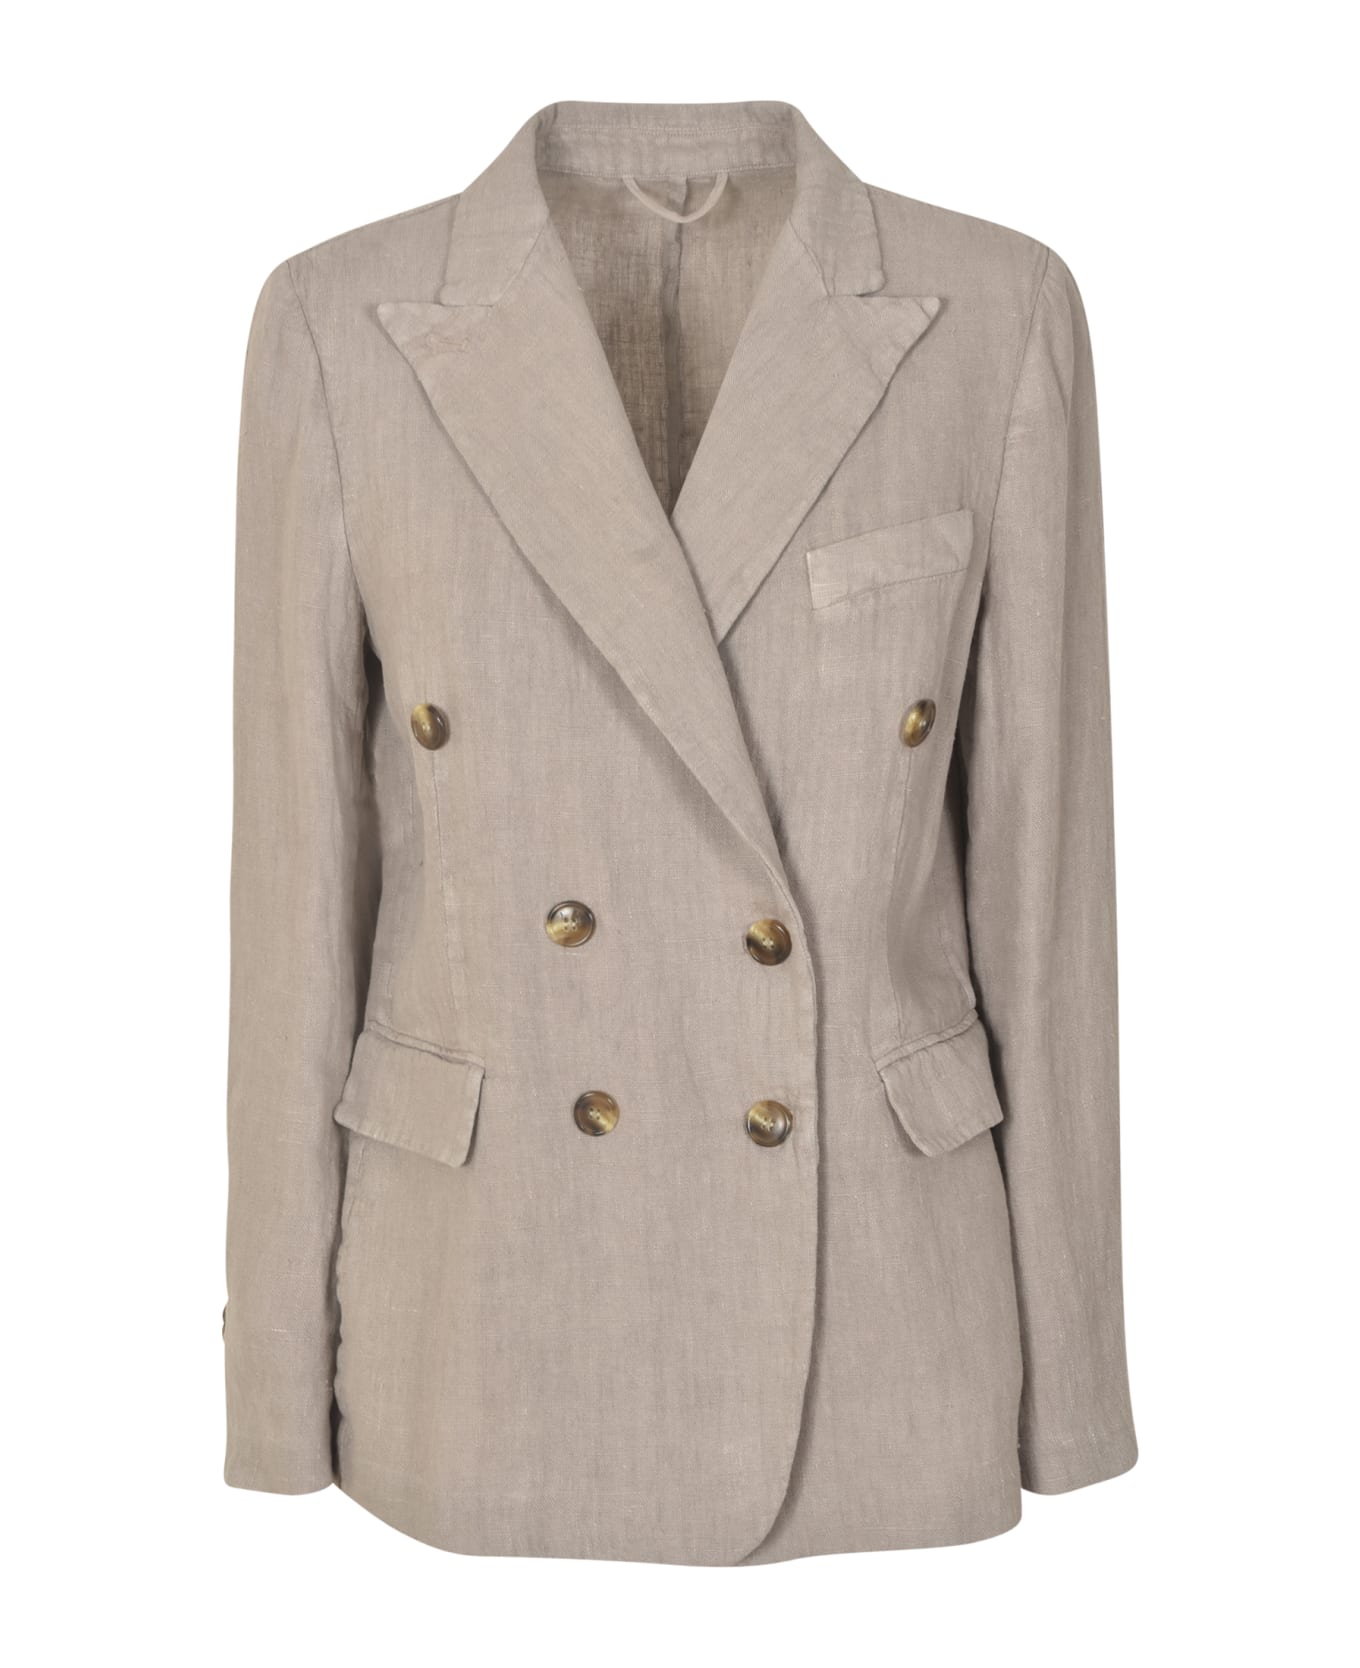 Kiltie Tri Pocket Double-breasted Dinner Jacket - Natural